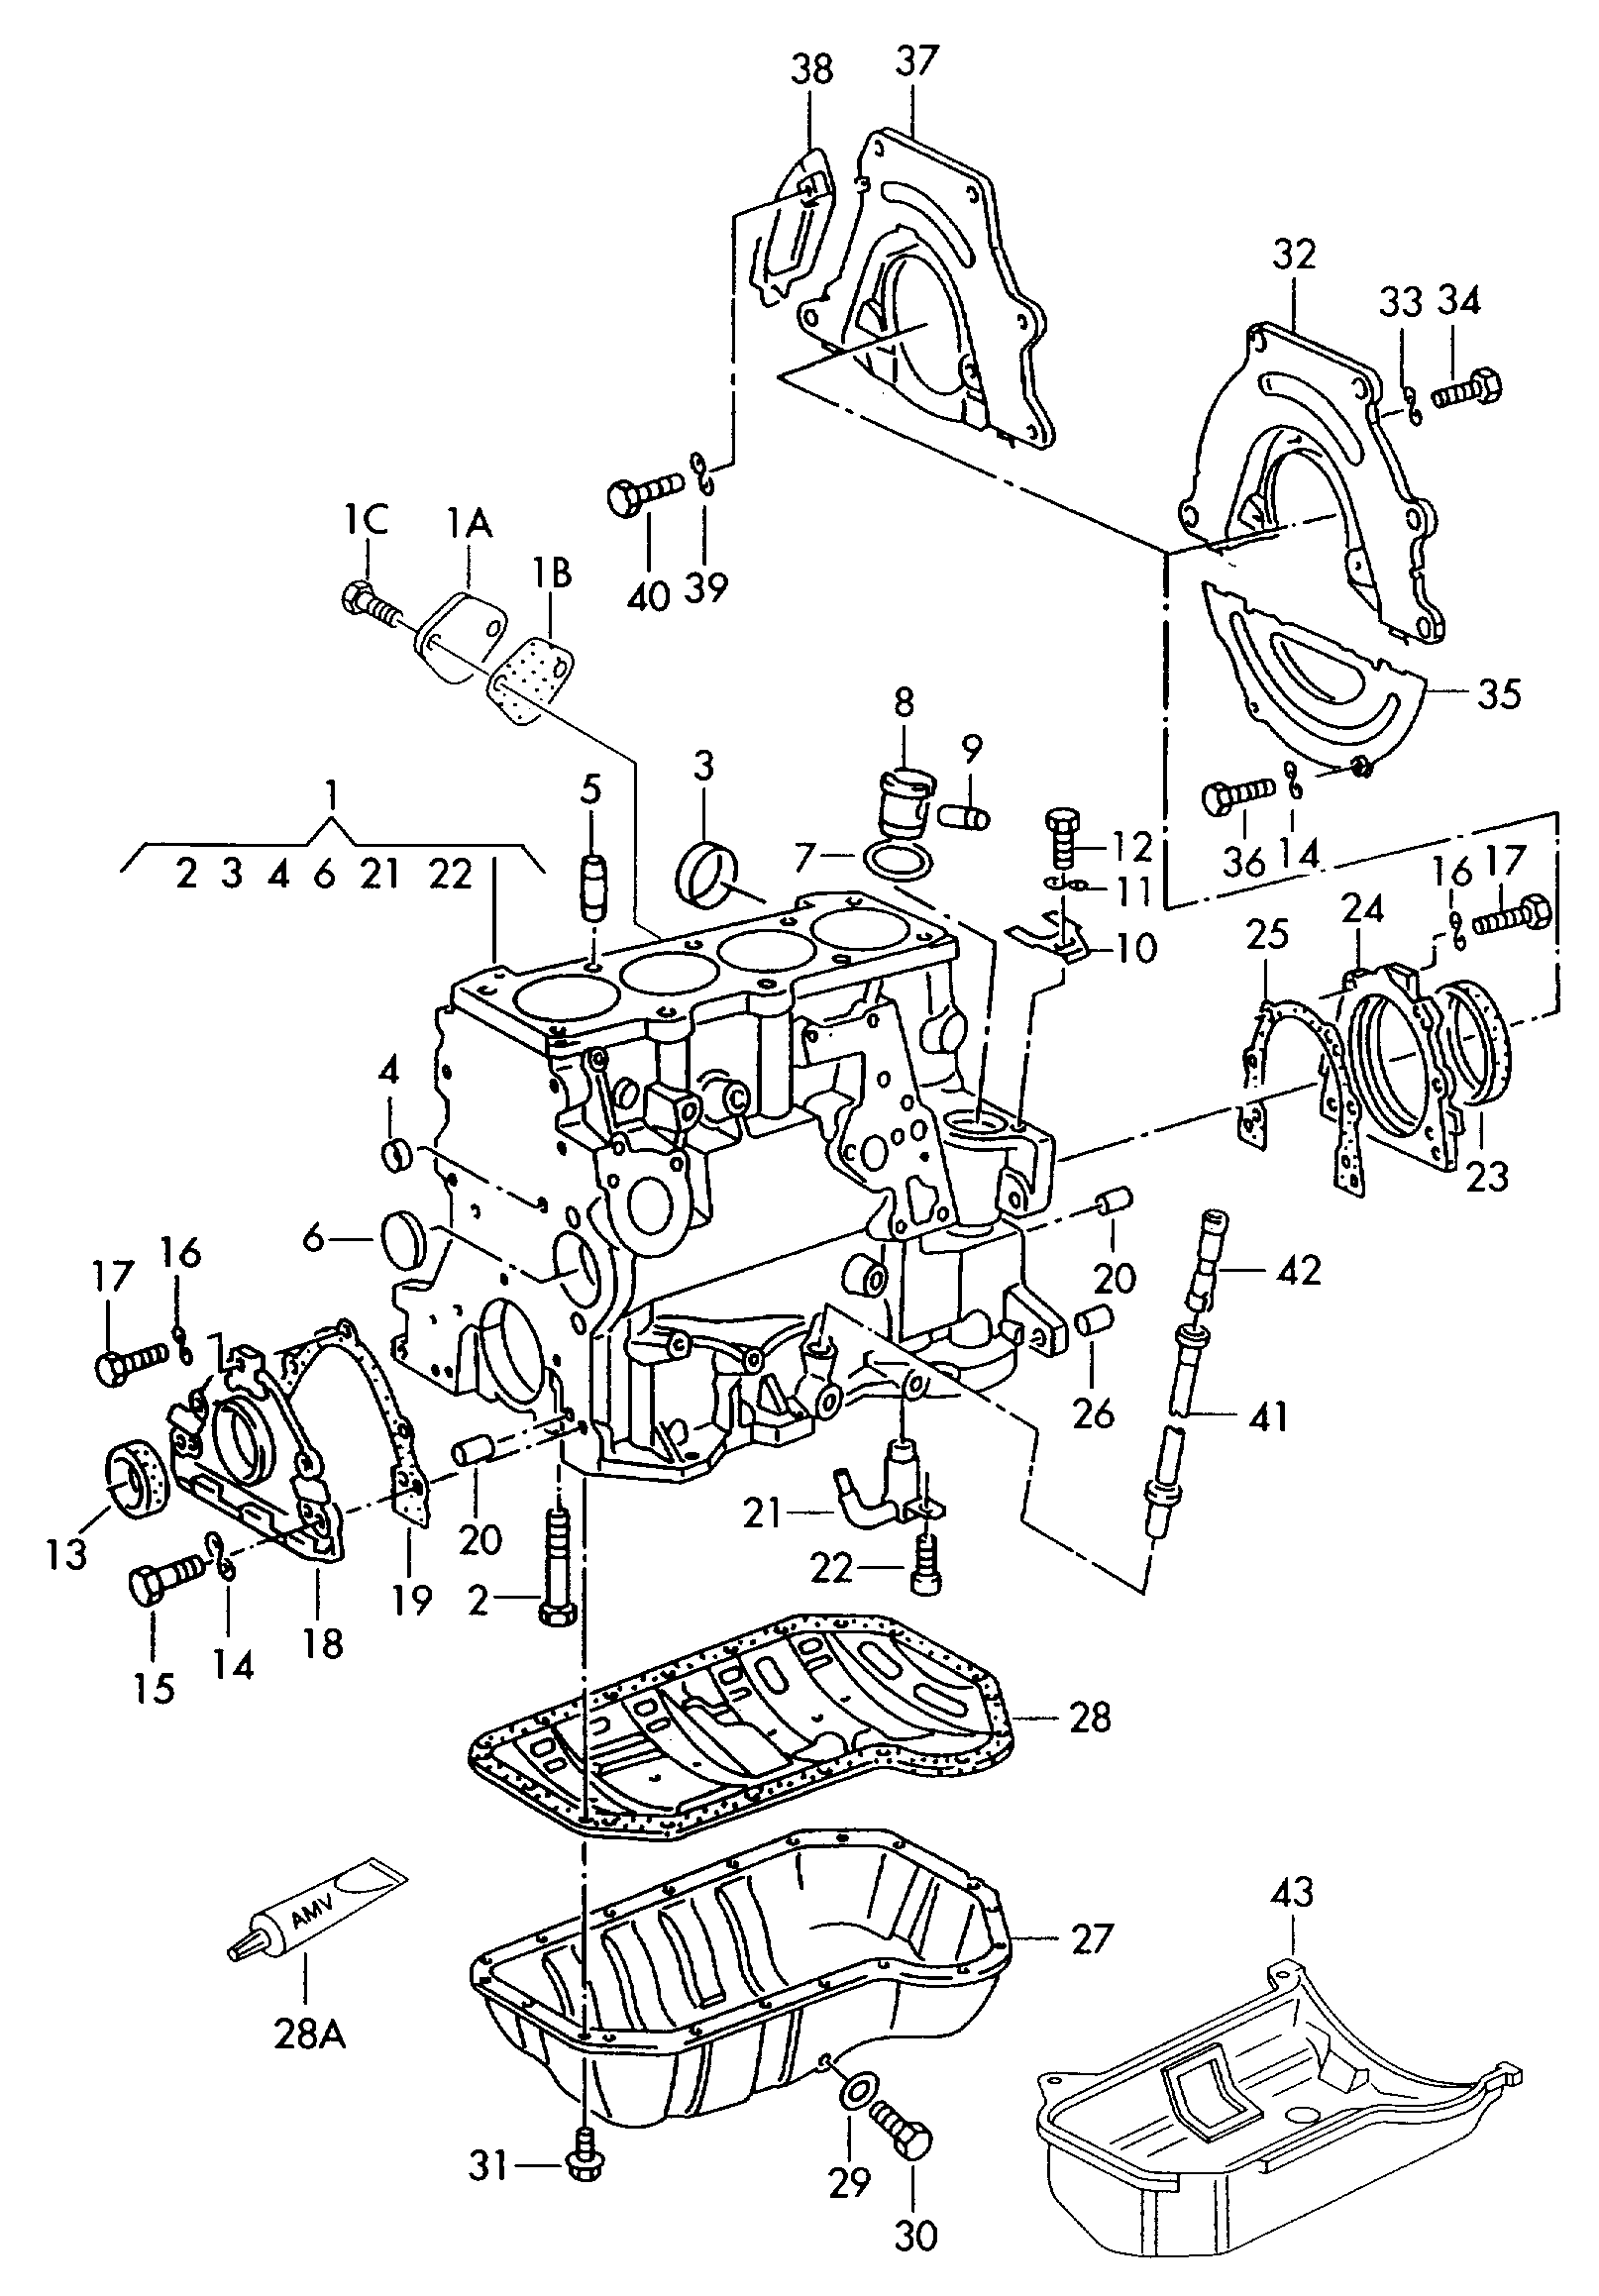 cylinder block with pistons; oil sump - Golf Cabriolet(GOC)  